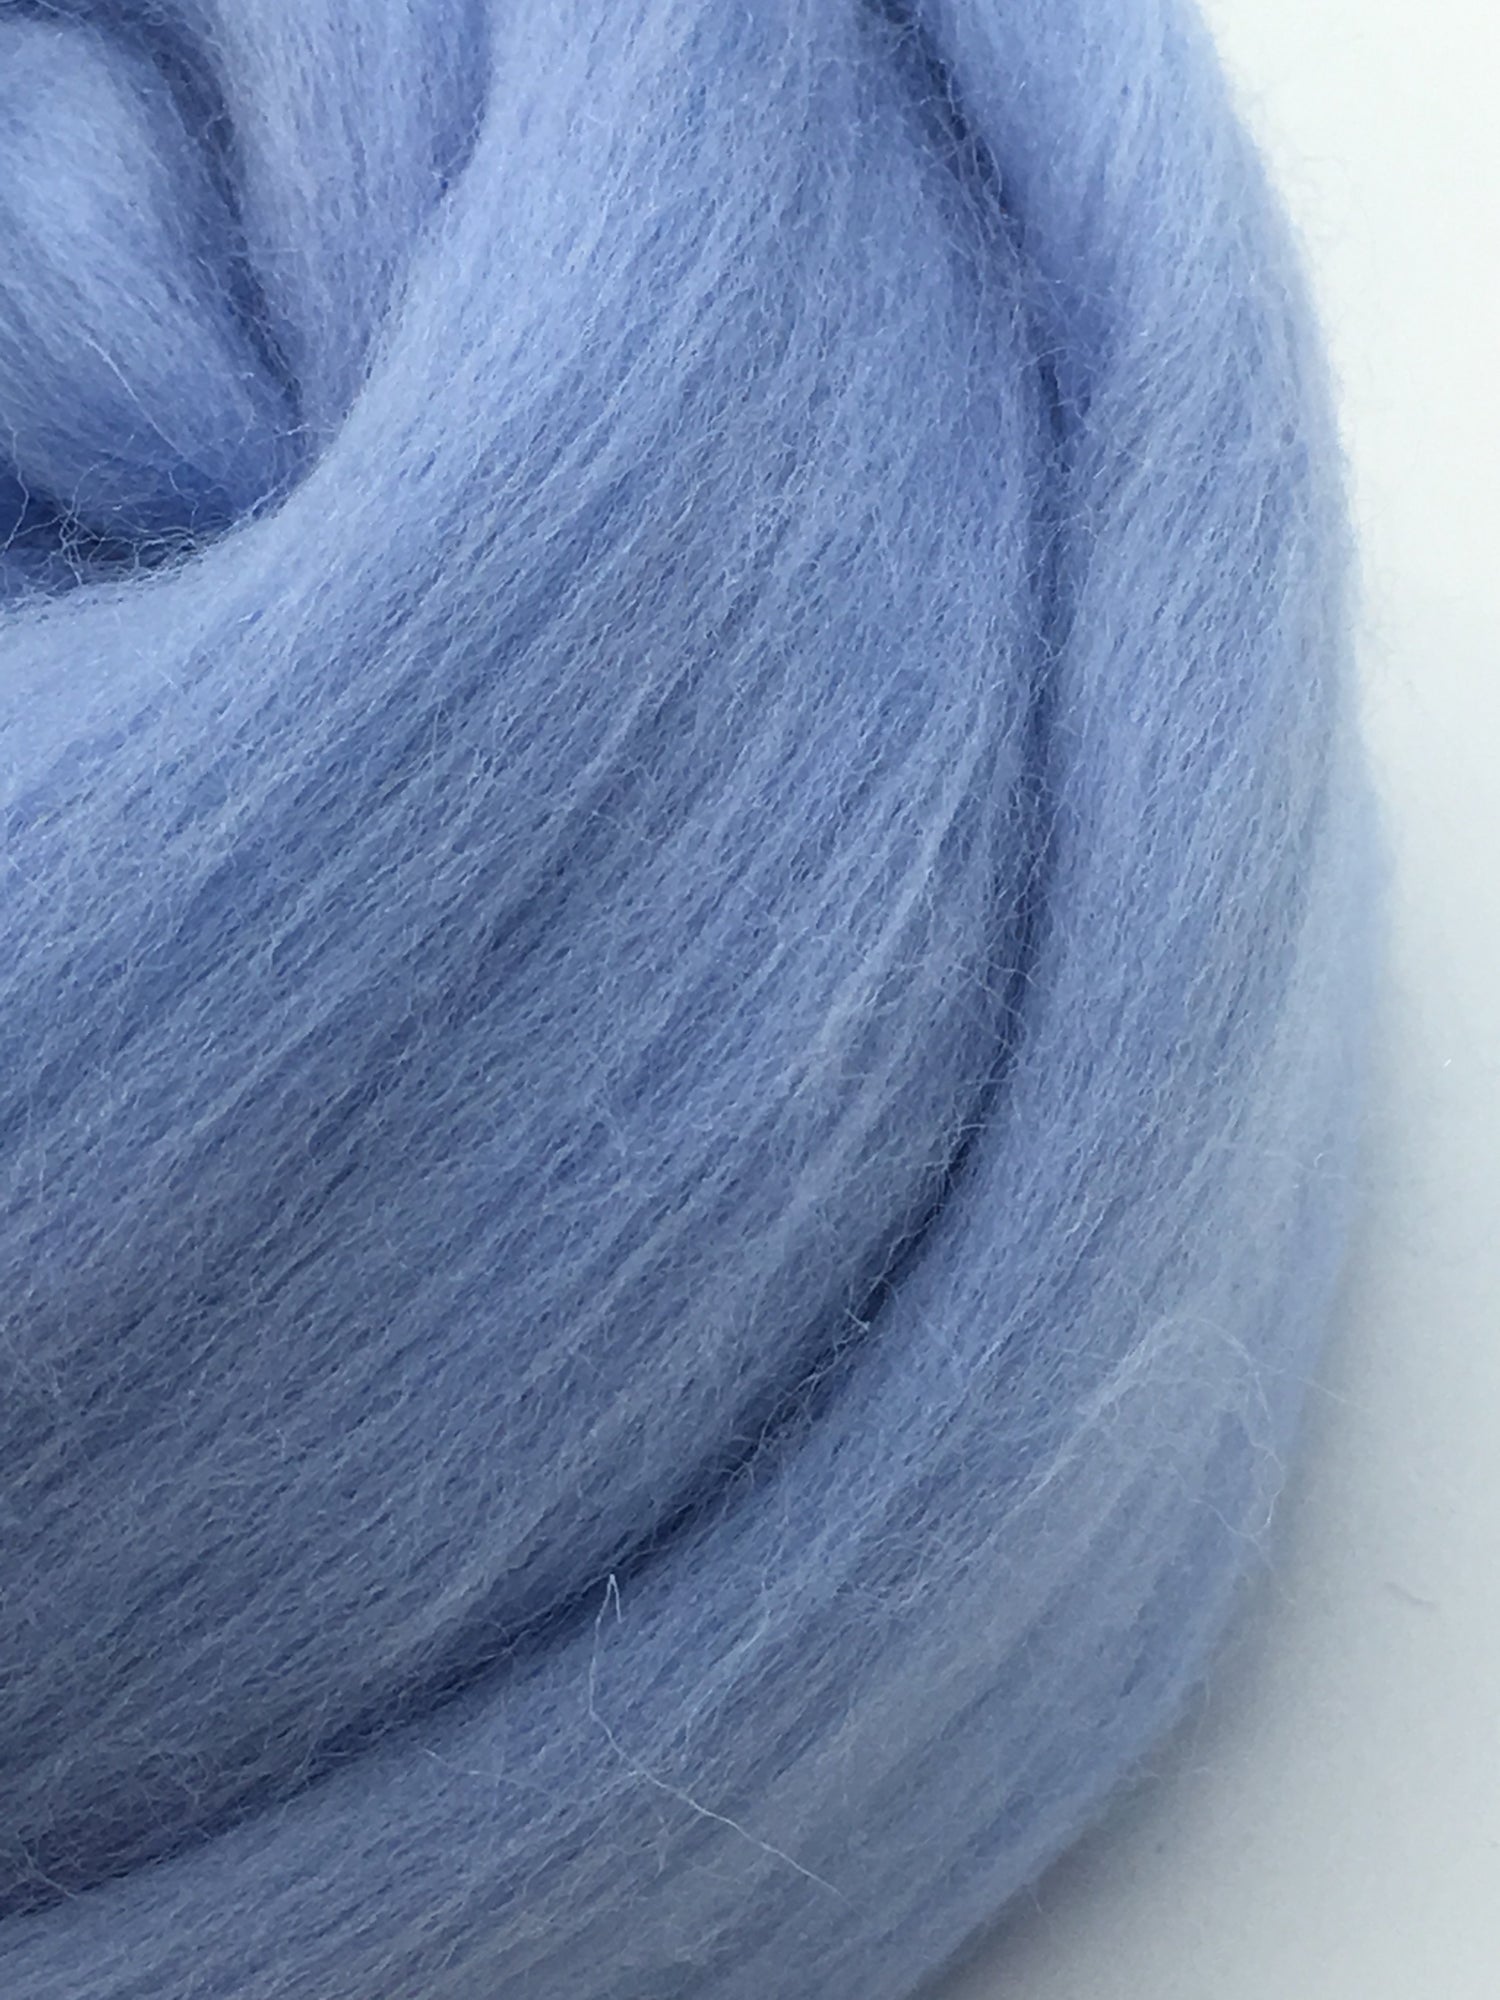 9 oz Blue Wool Roving for Spinning into Yarn and Wet or Needle Felting.